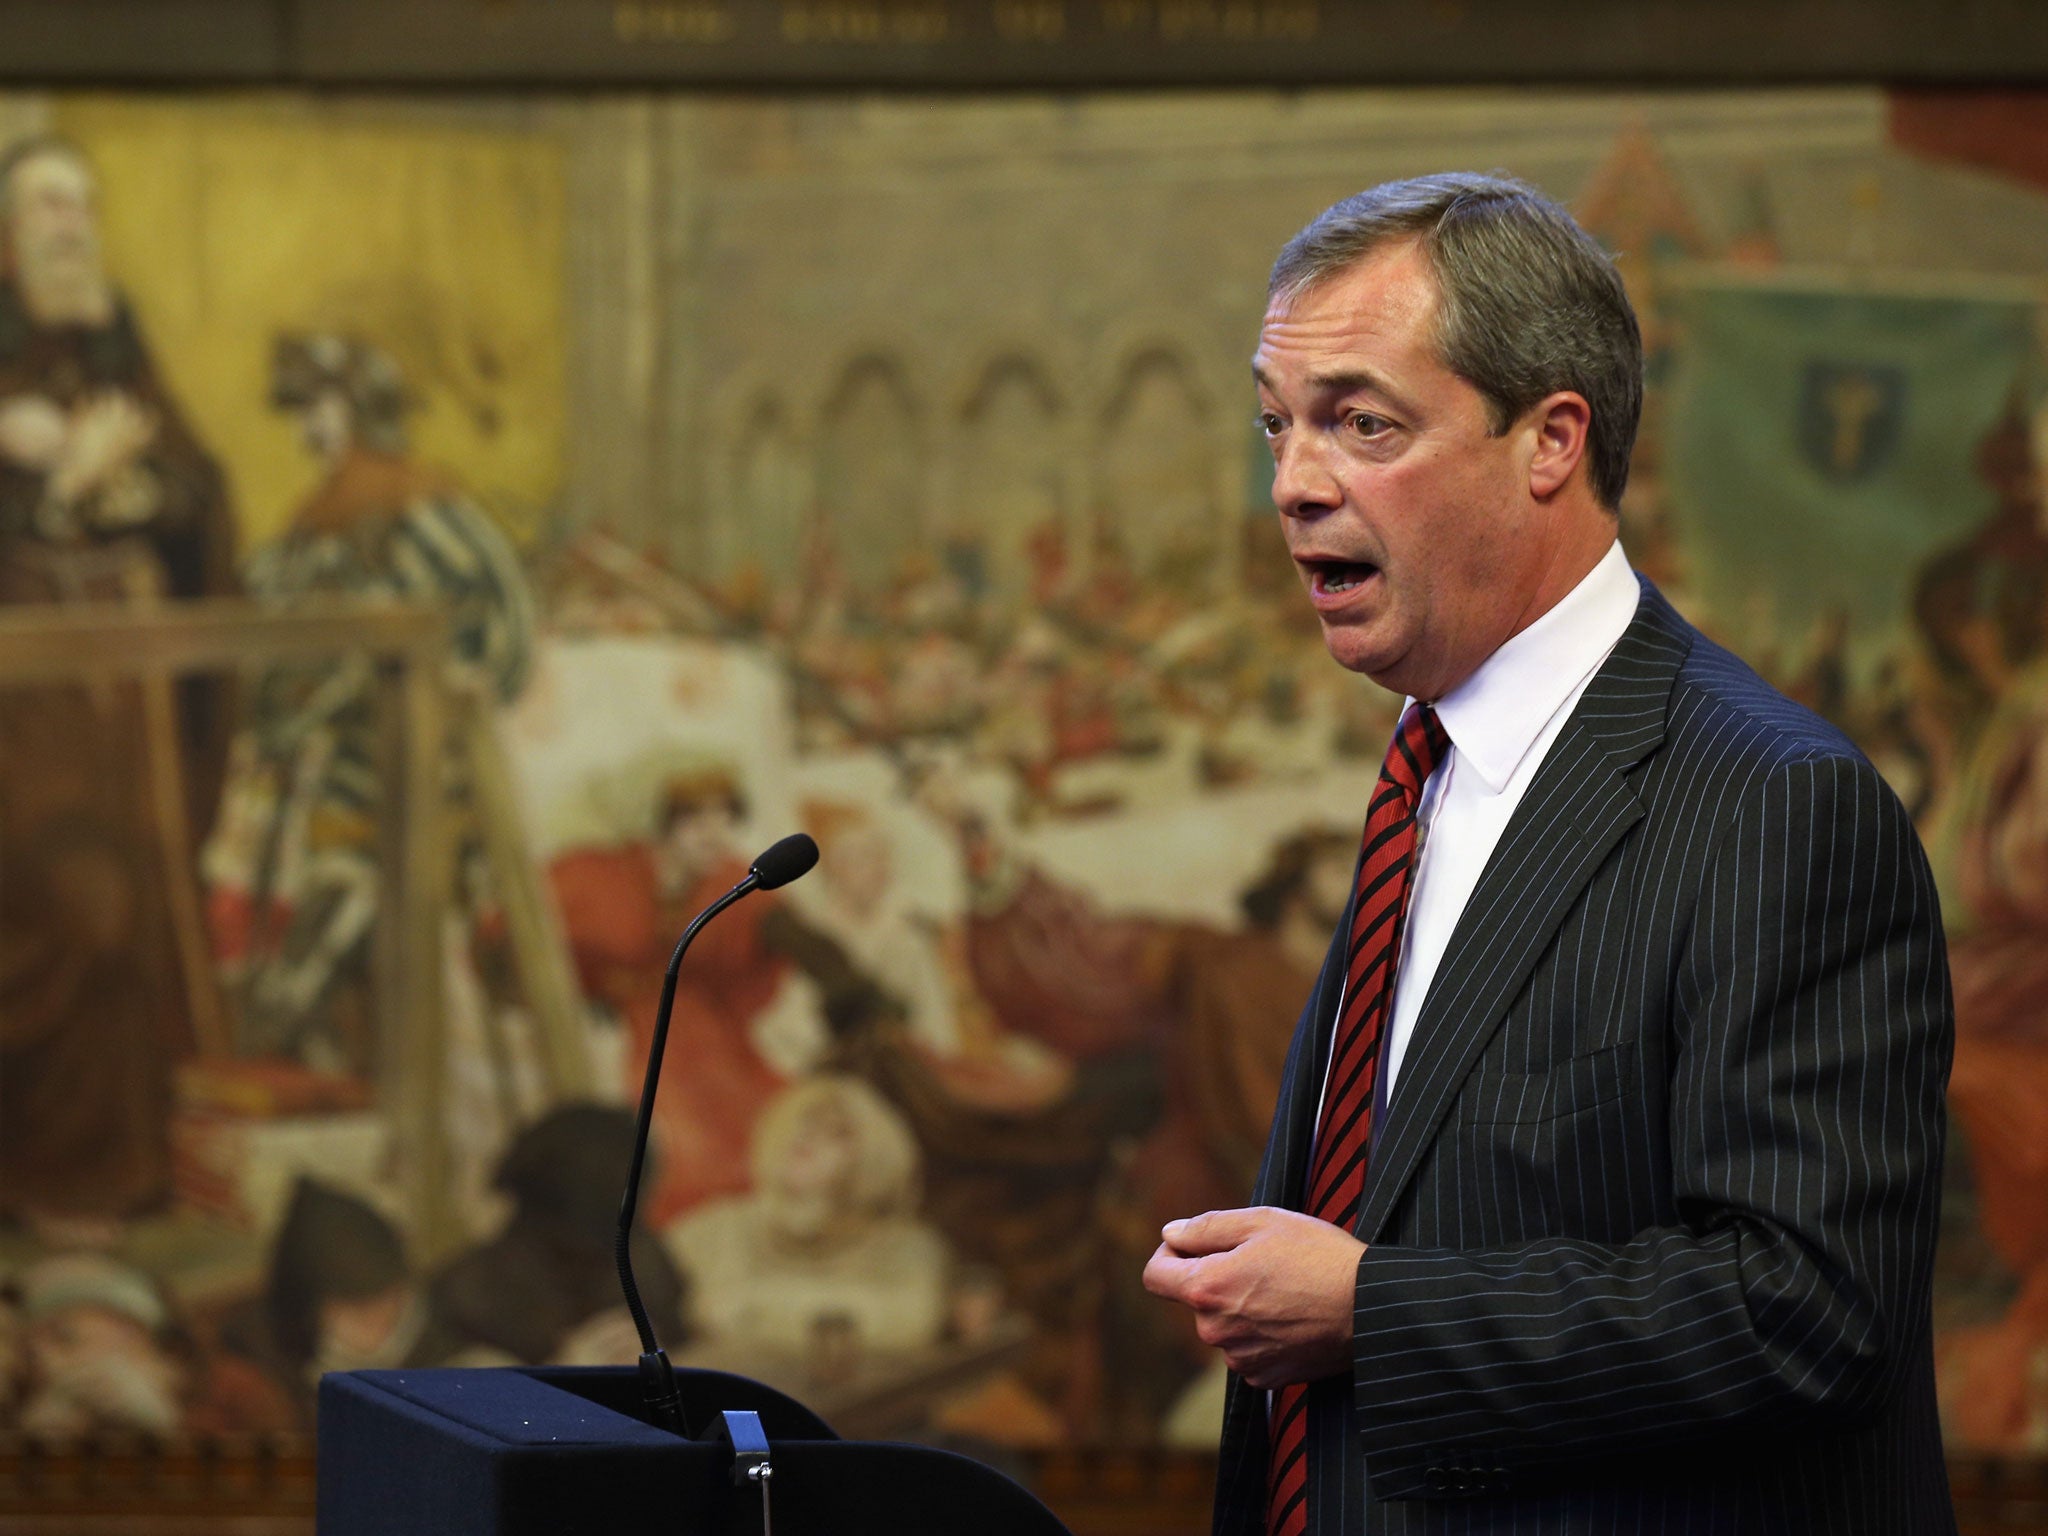 Ukip leader Nigel Farage said he would be vetting election candidates to remove 'extremist, nasty or barmy' views from the party